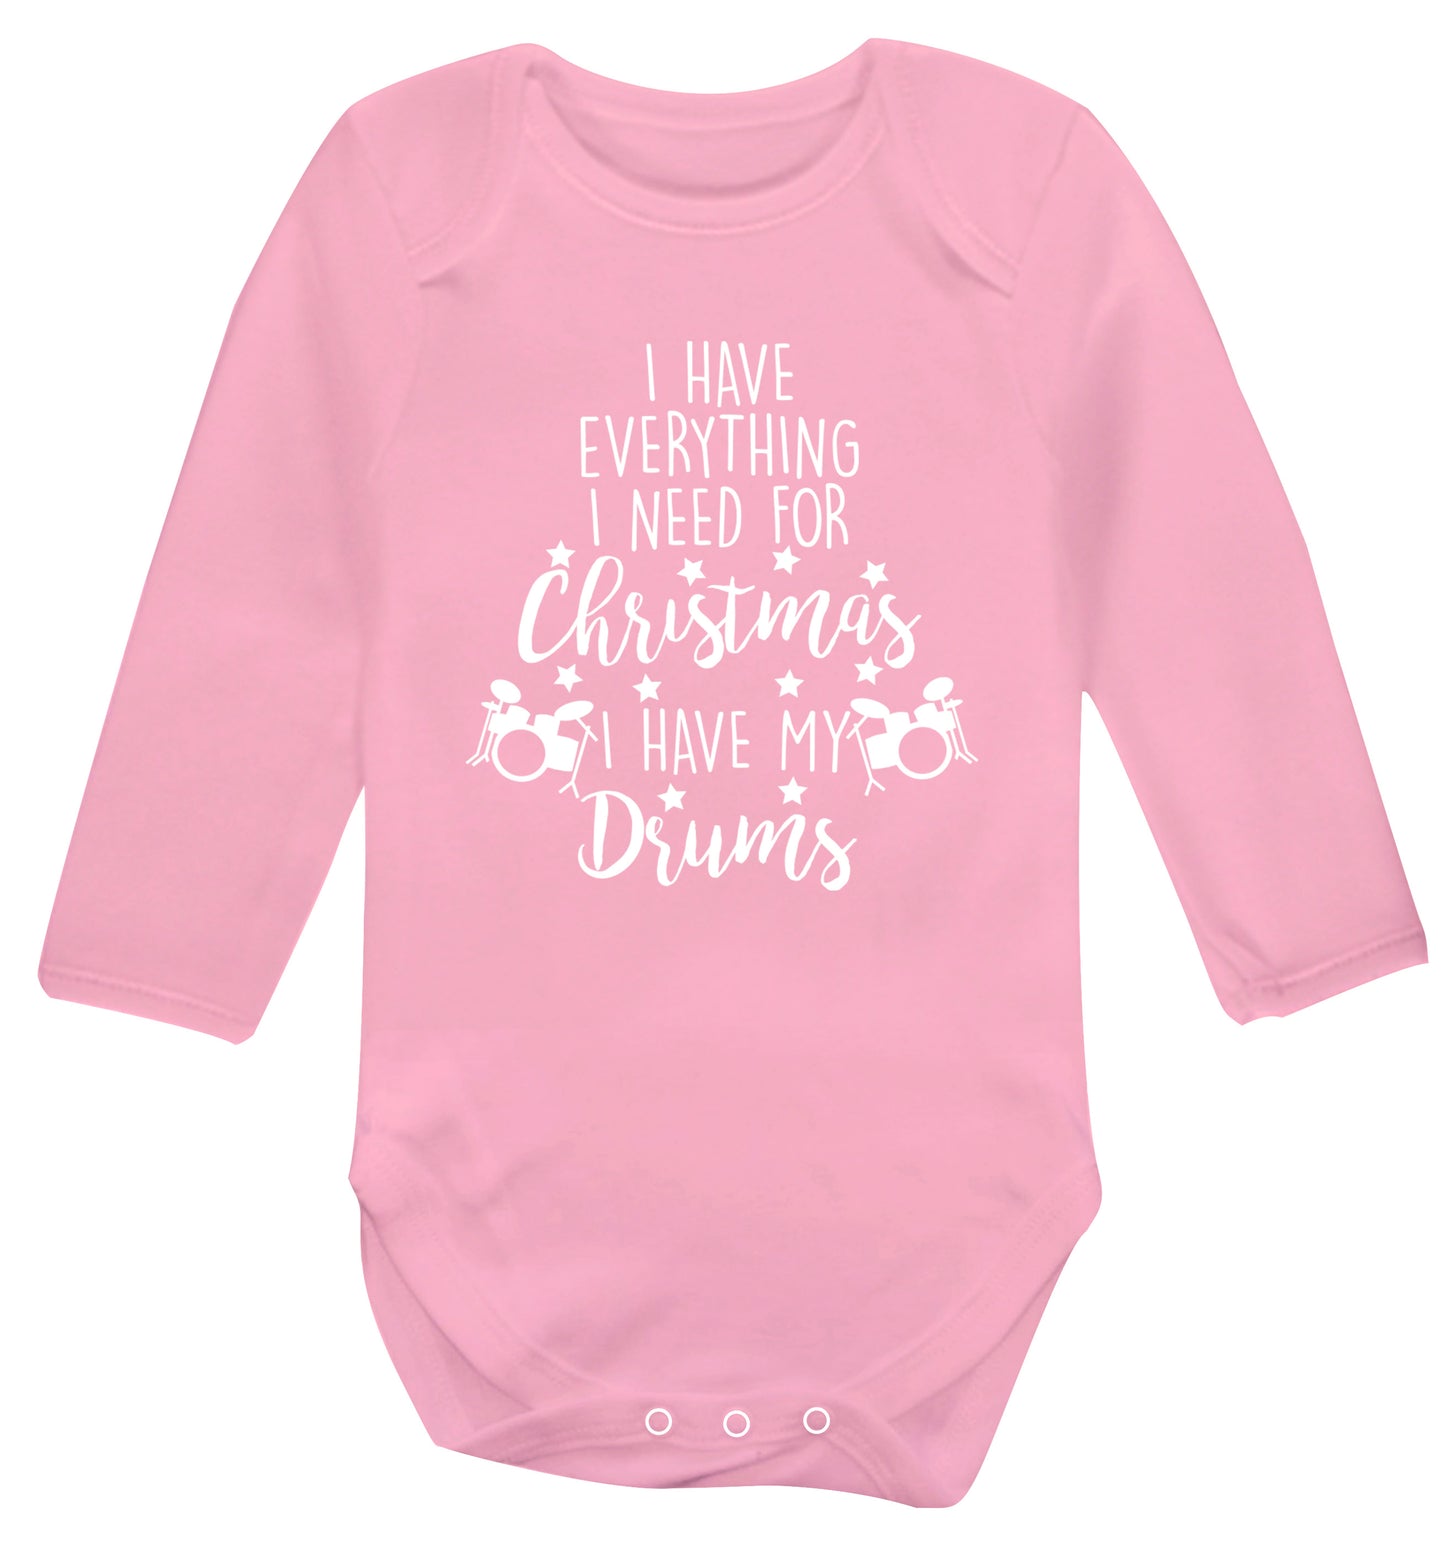 I have everything I need for Christmas I have my drums! Baby Vest long sleeved pale pink 6-12 months